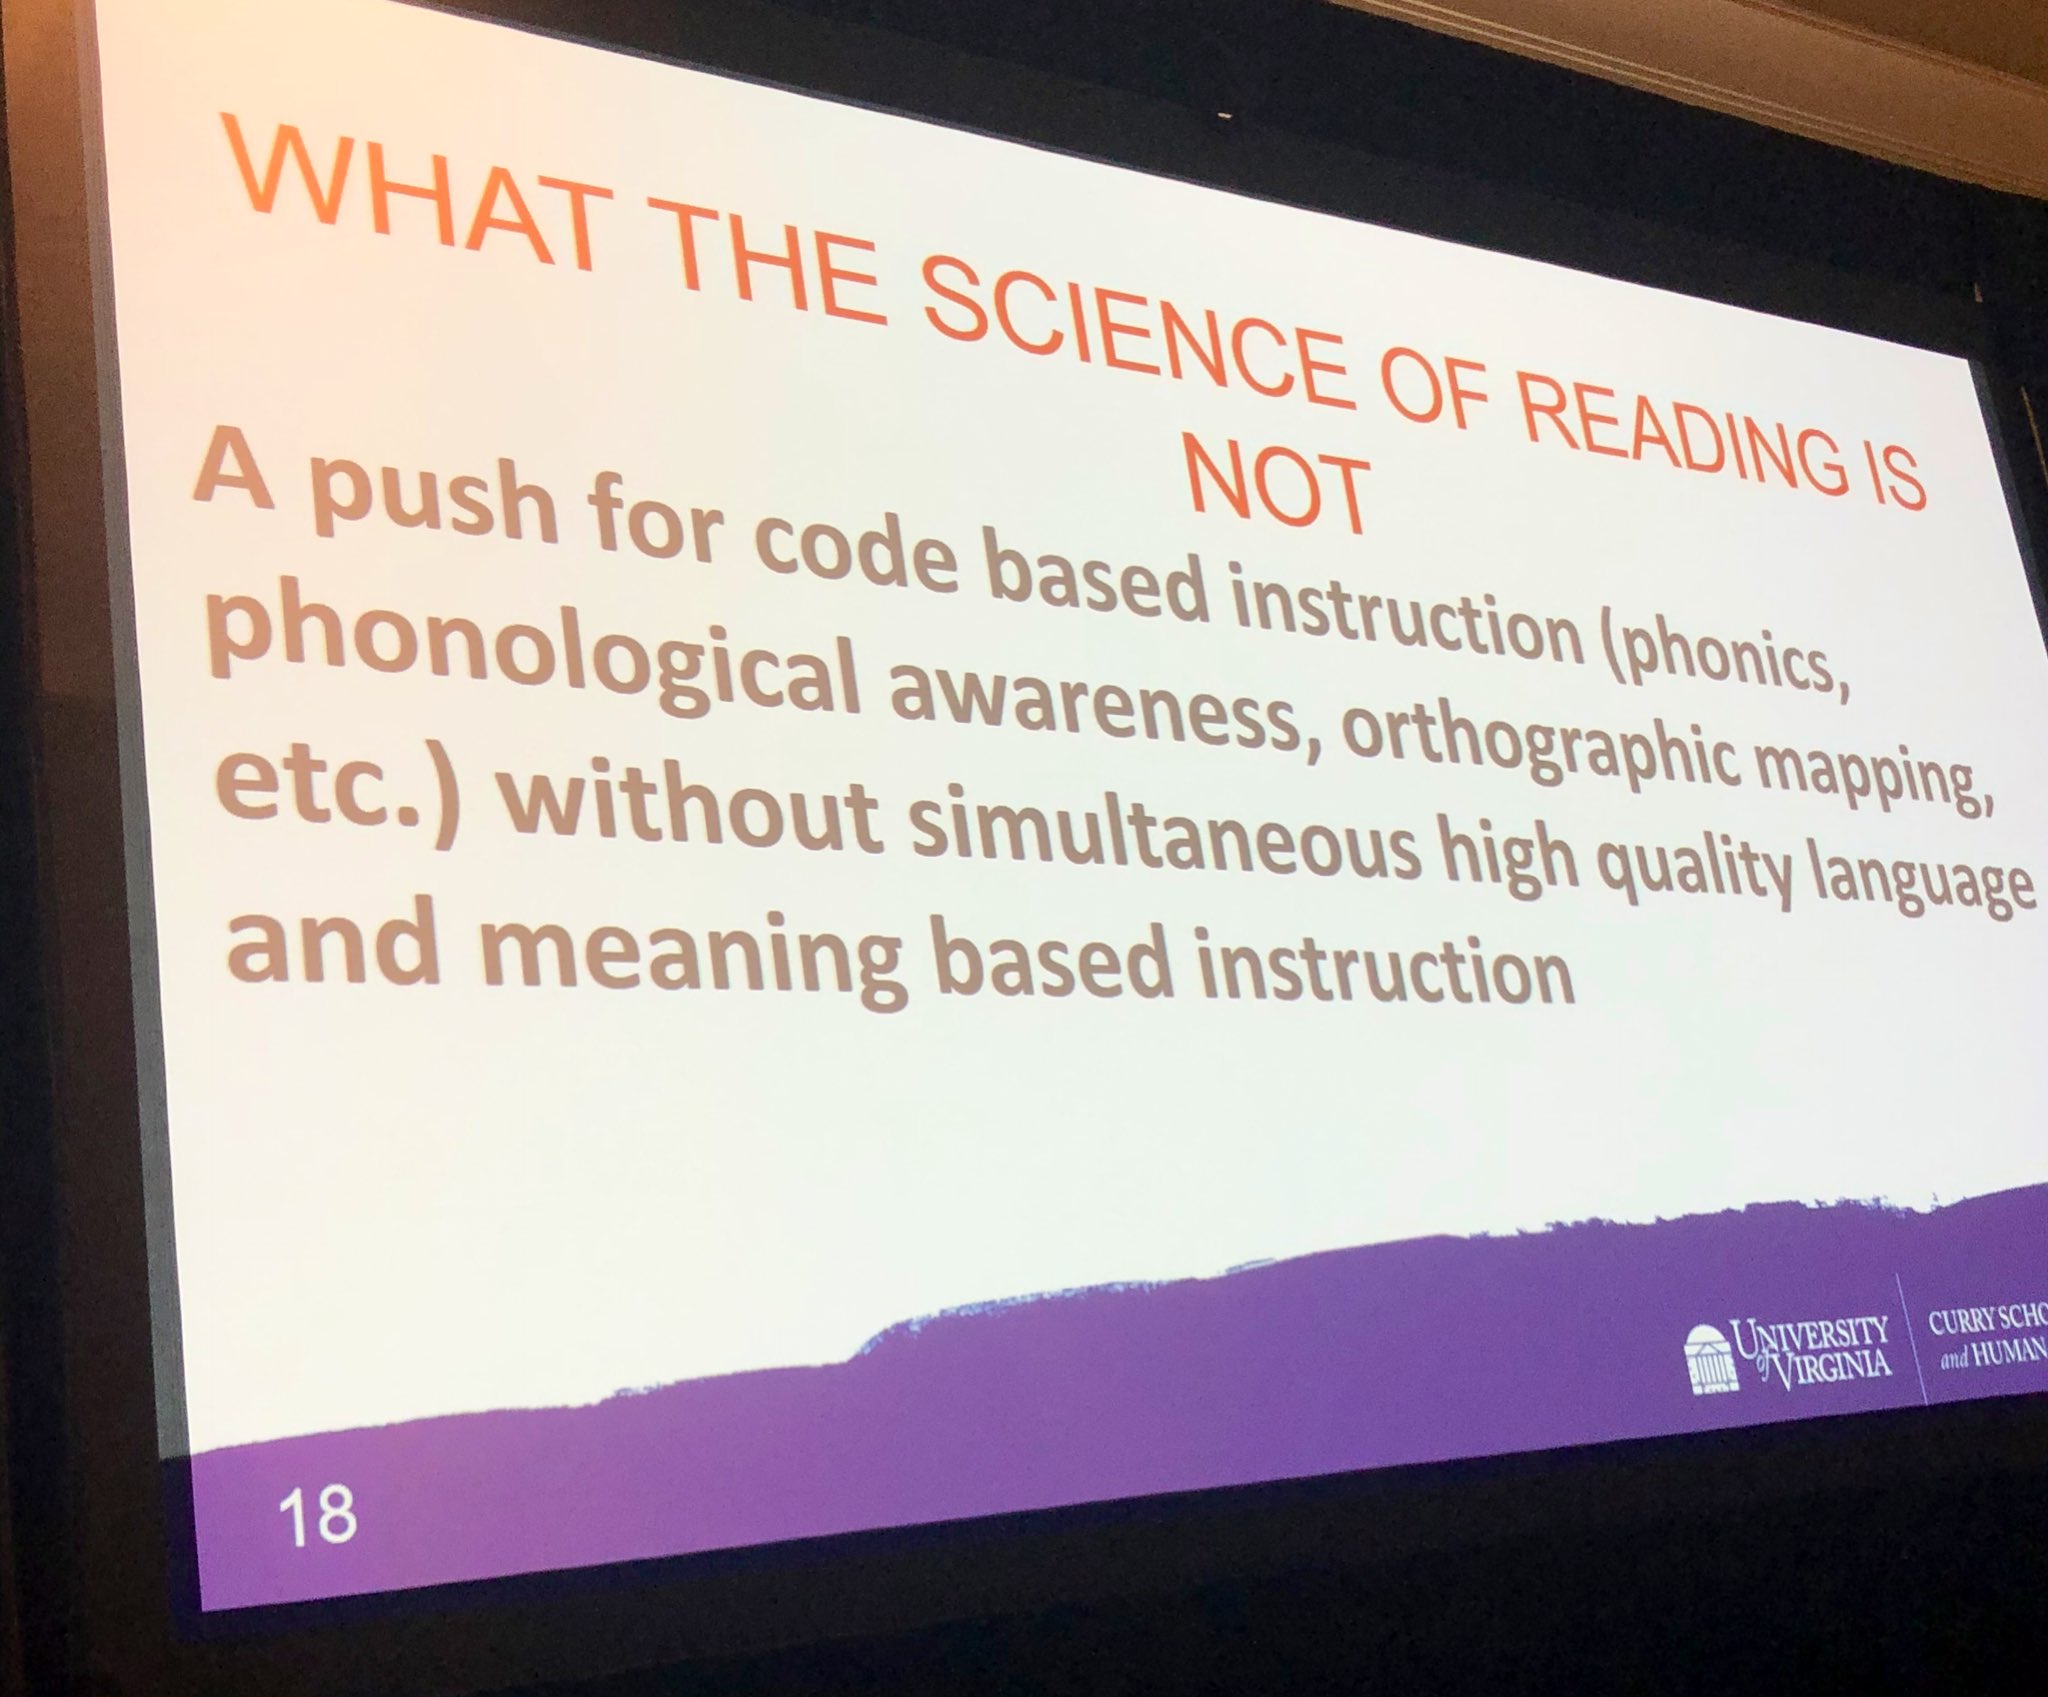 What the Science of Reading is not